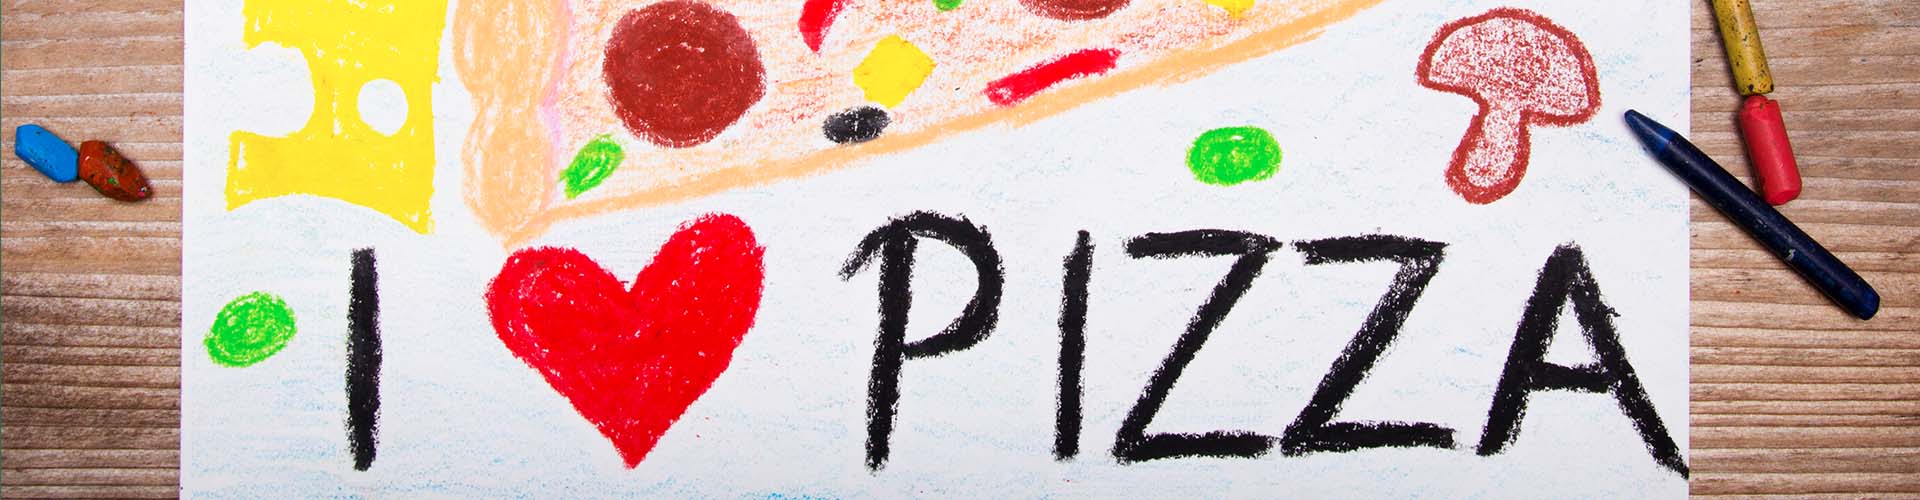 Kids drawing with words saying I love pizza